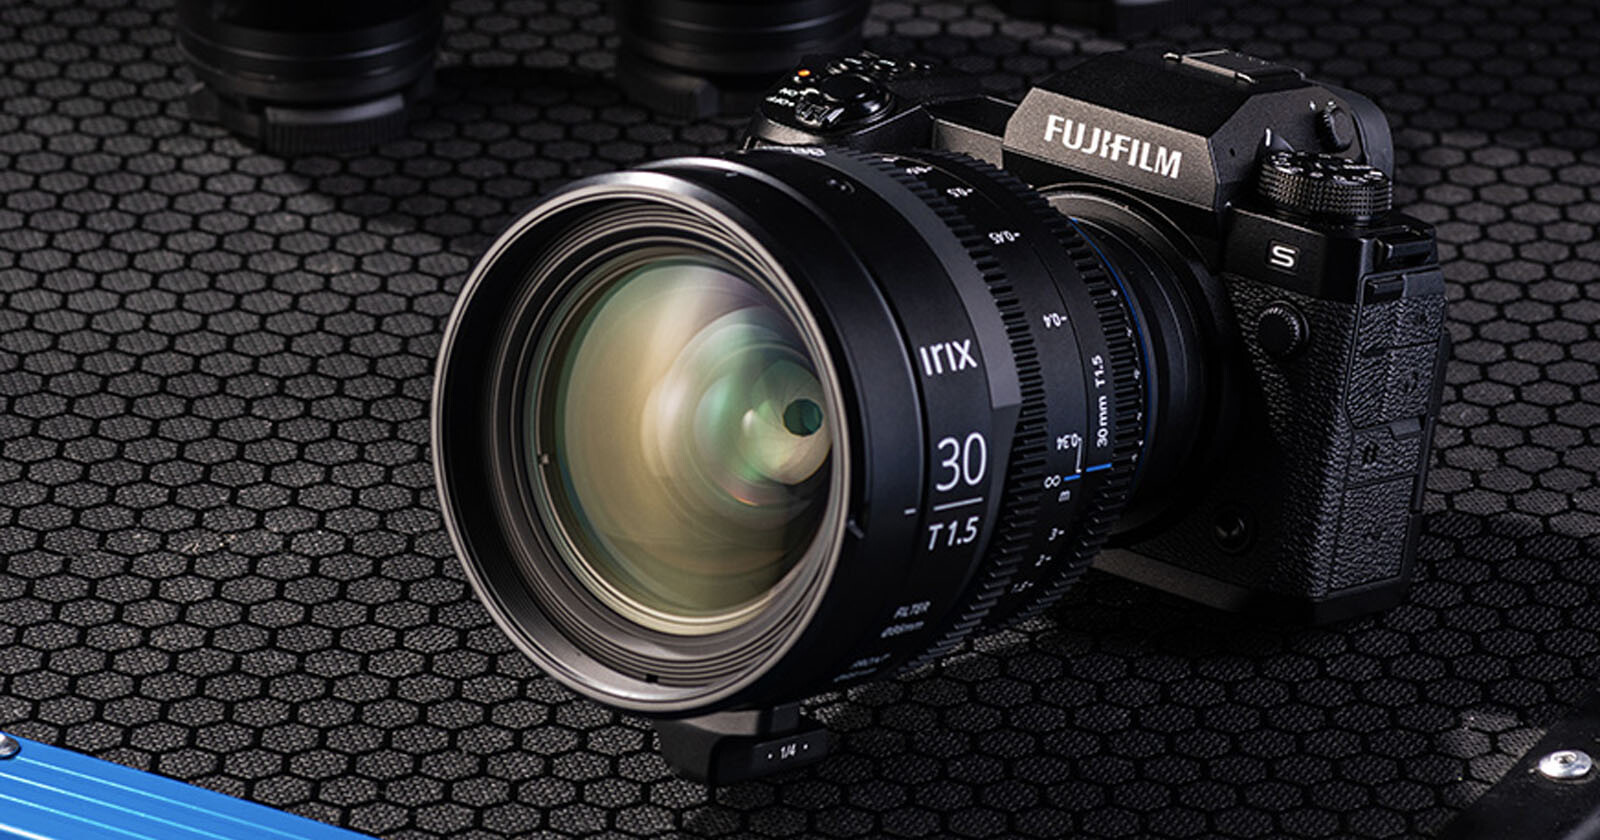  irix expands cinema lens support include fujifilm mount 